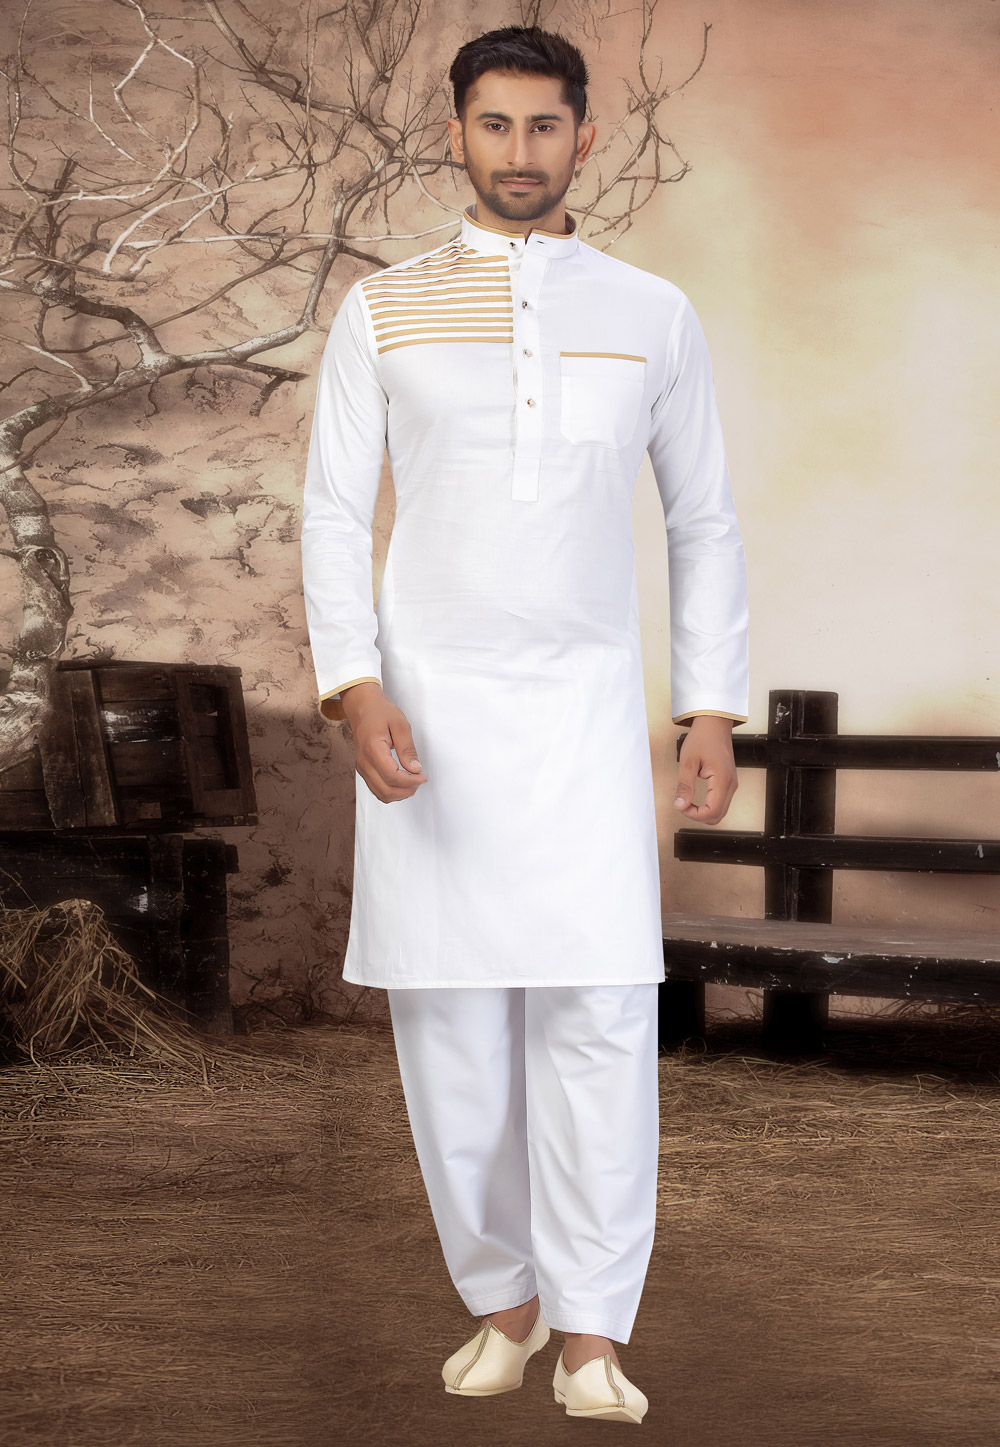 Trendy Pathani Suit Styles for Men: The Latest Fashion